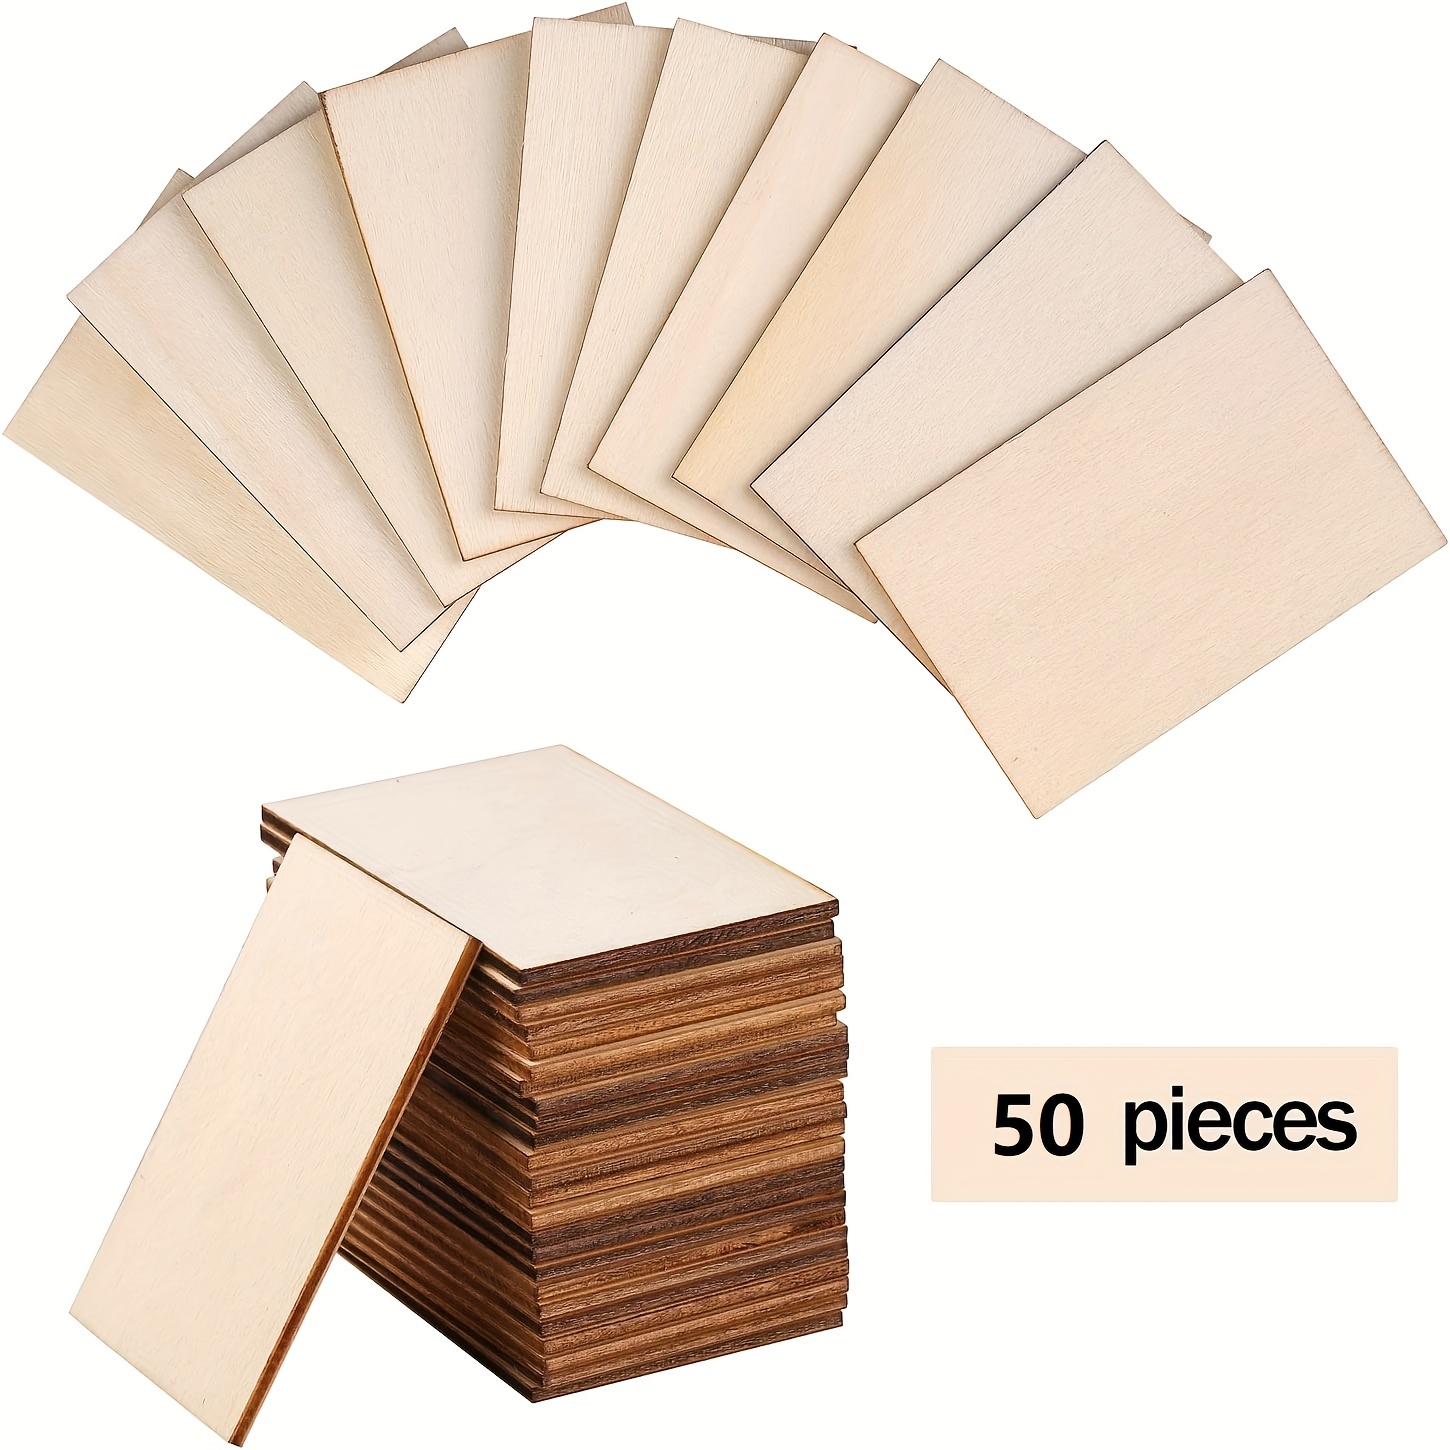 

50pcs 5x7.6cm 2x3inch Wood Chips Rectangular Blank Pointed Corner Wood Chips For Diy Art Craft Projects